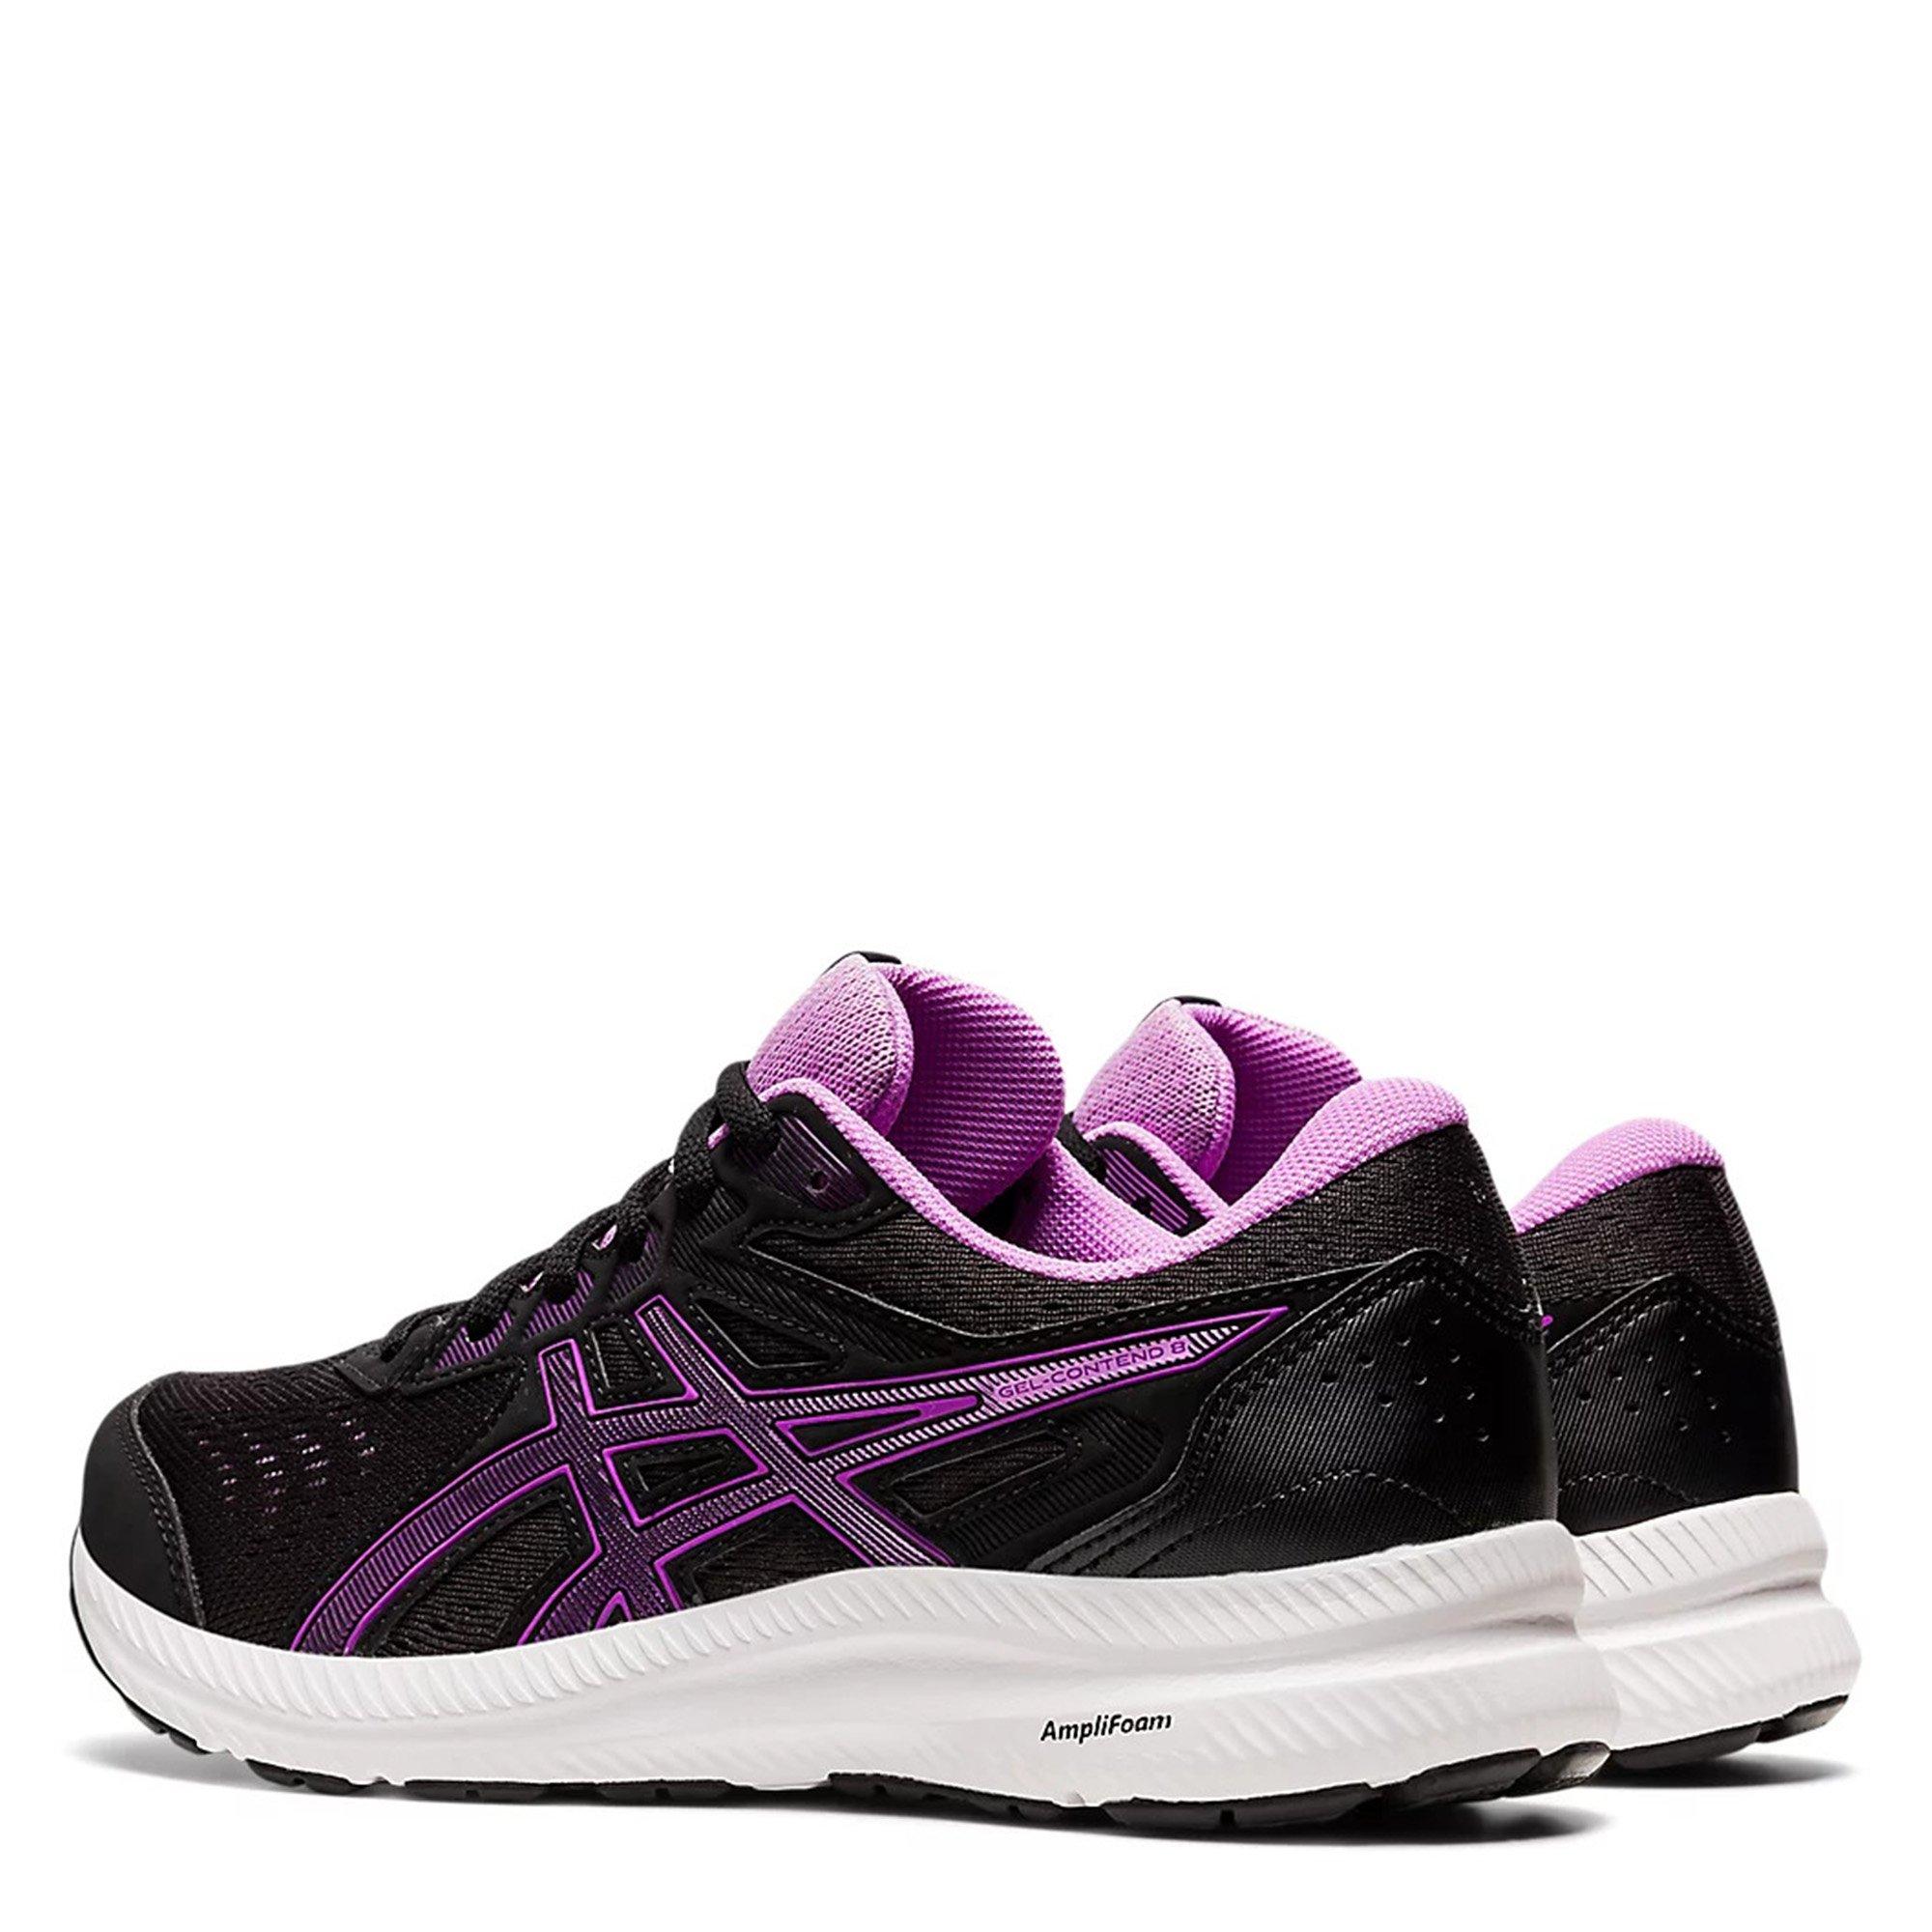 Asics | GEL Contend 8 Womens Running Shoes | Everyday Neutral Road ...